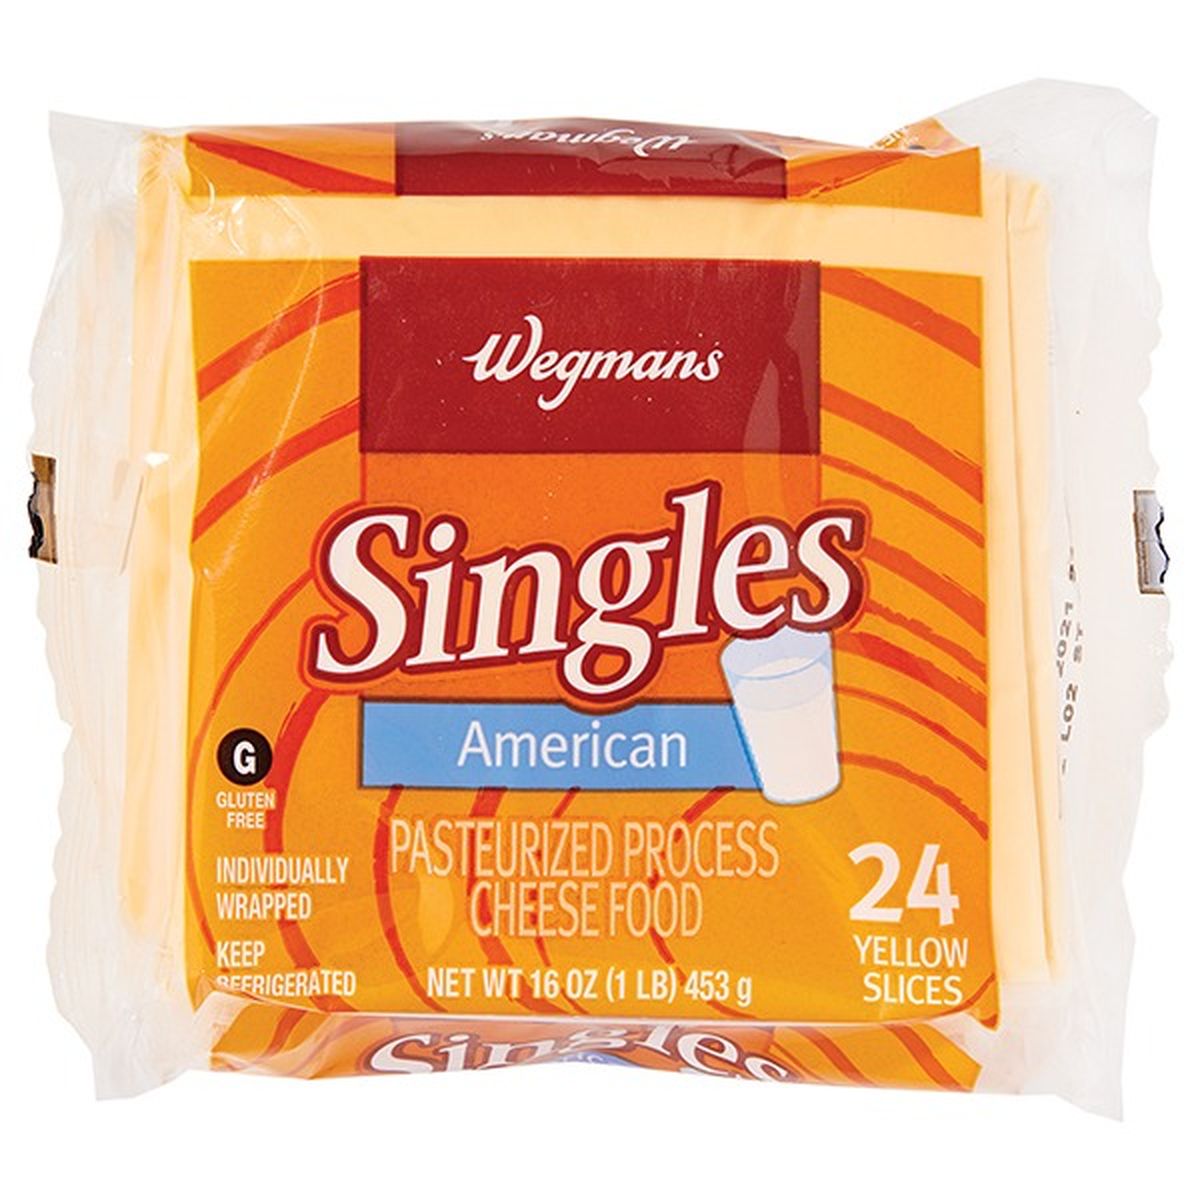 Calories in Wegmans Cheese, Singles, American, Yellow, 24 Slices